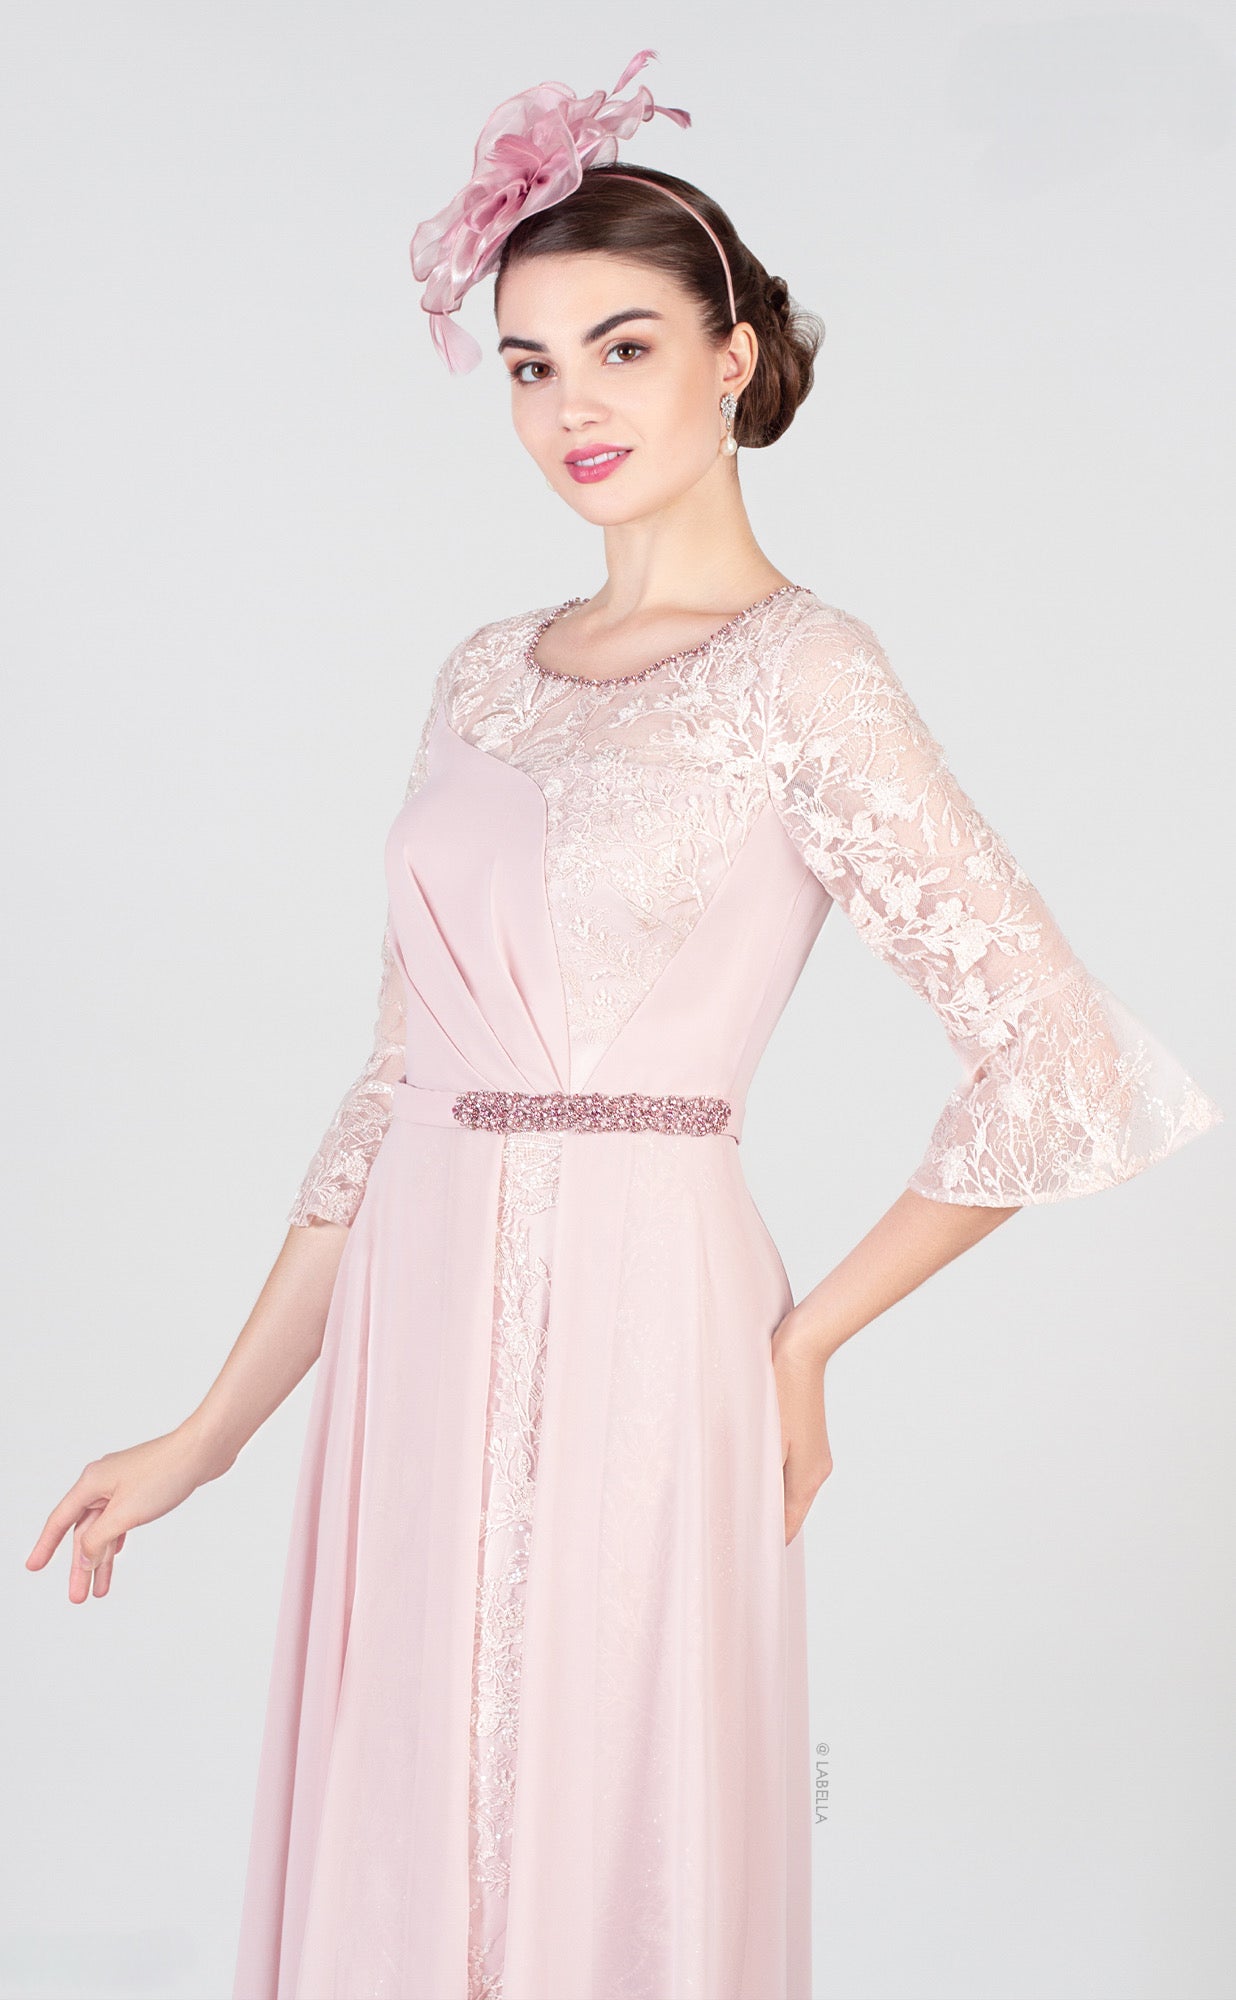 Dusty Rose Dress with Lace Detail and Diamante Belt